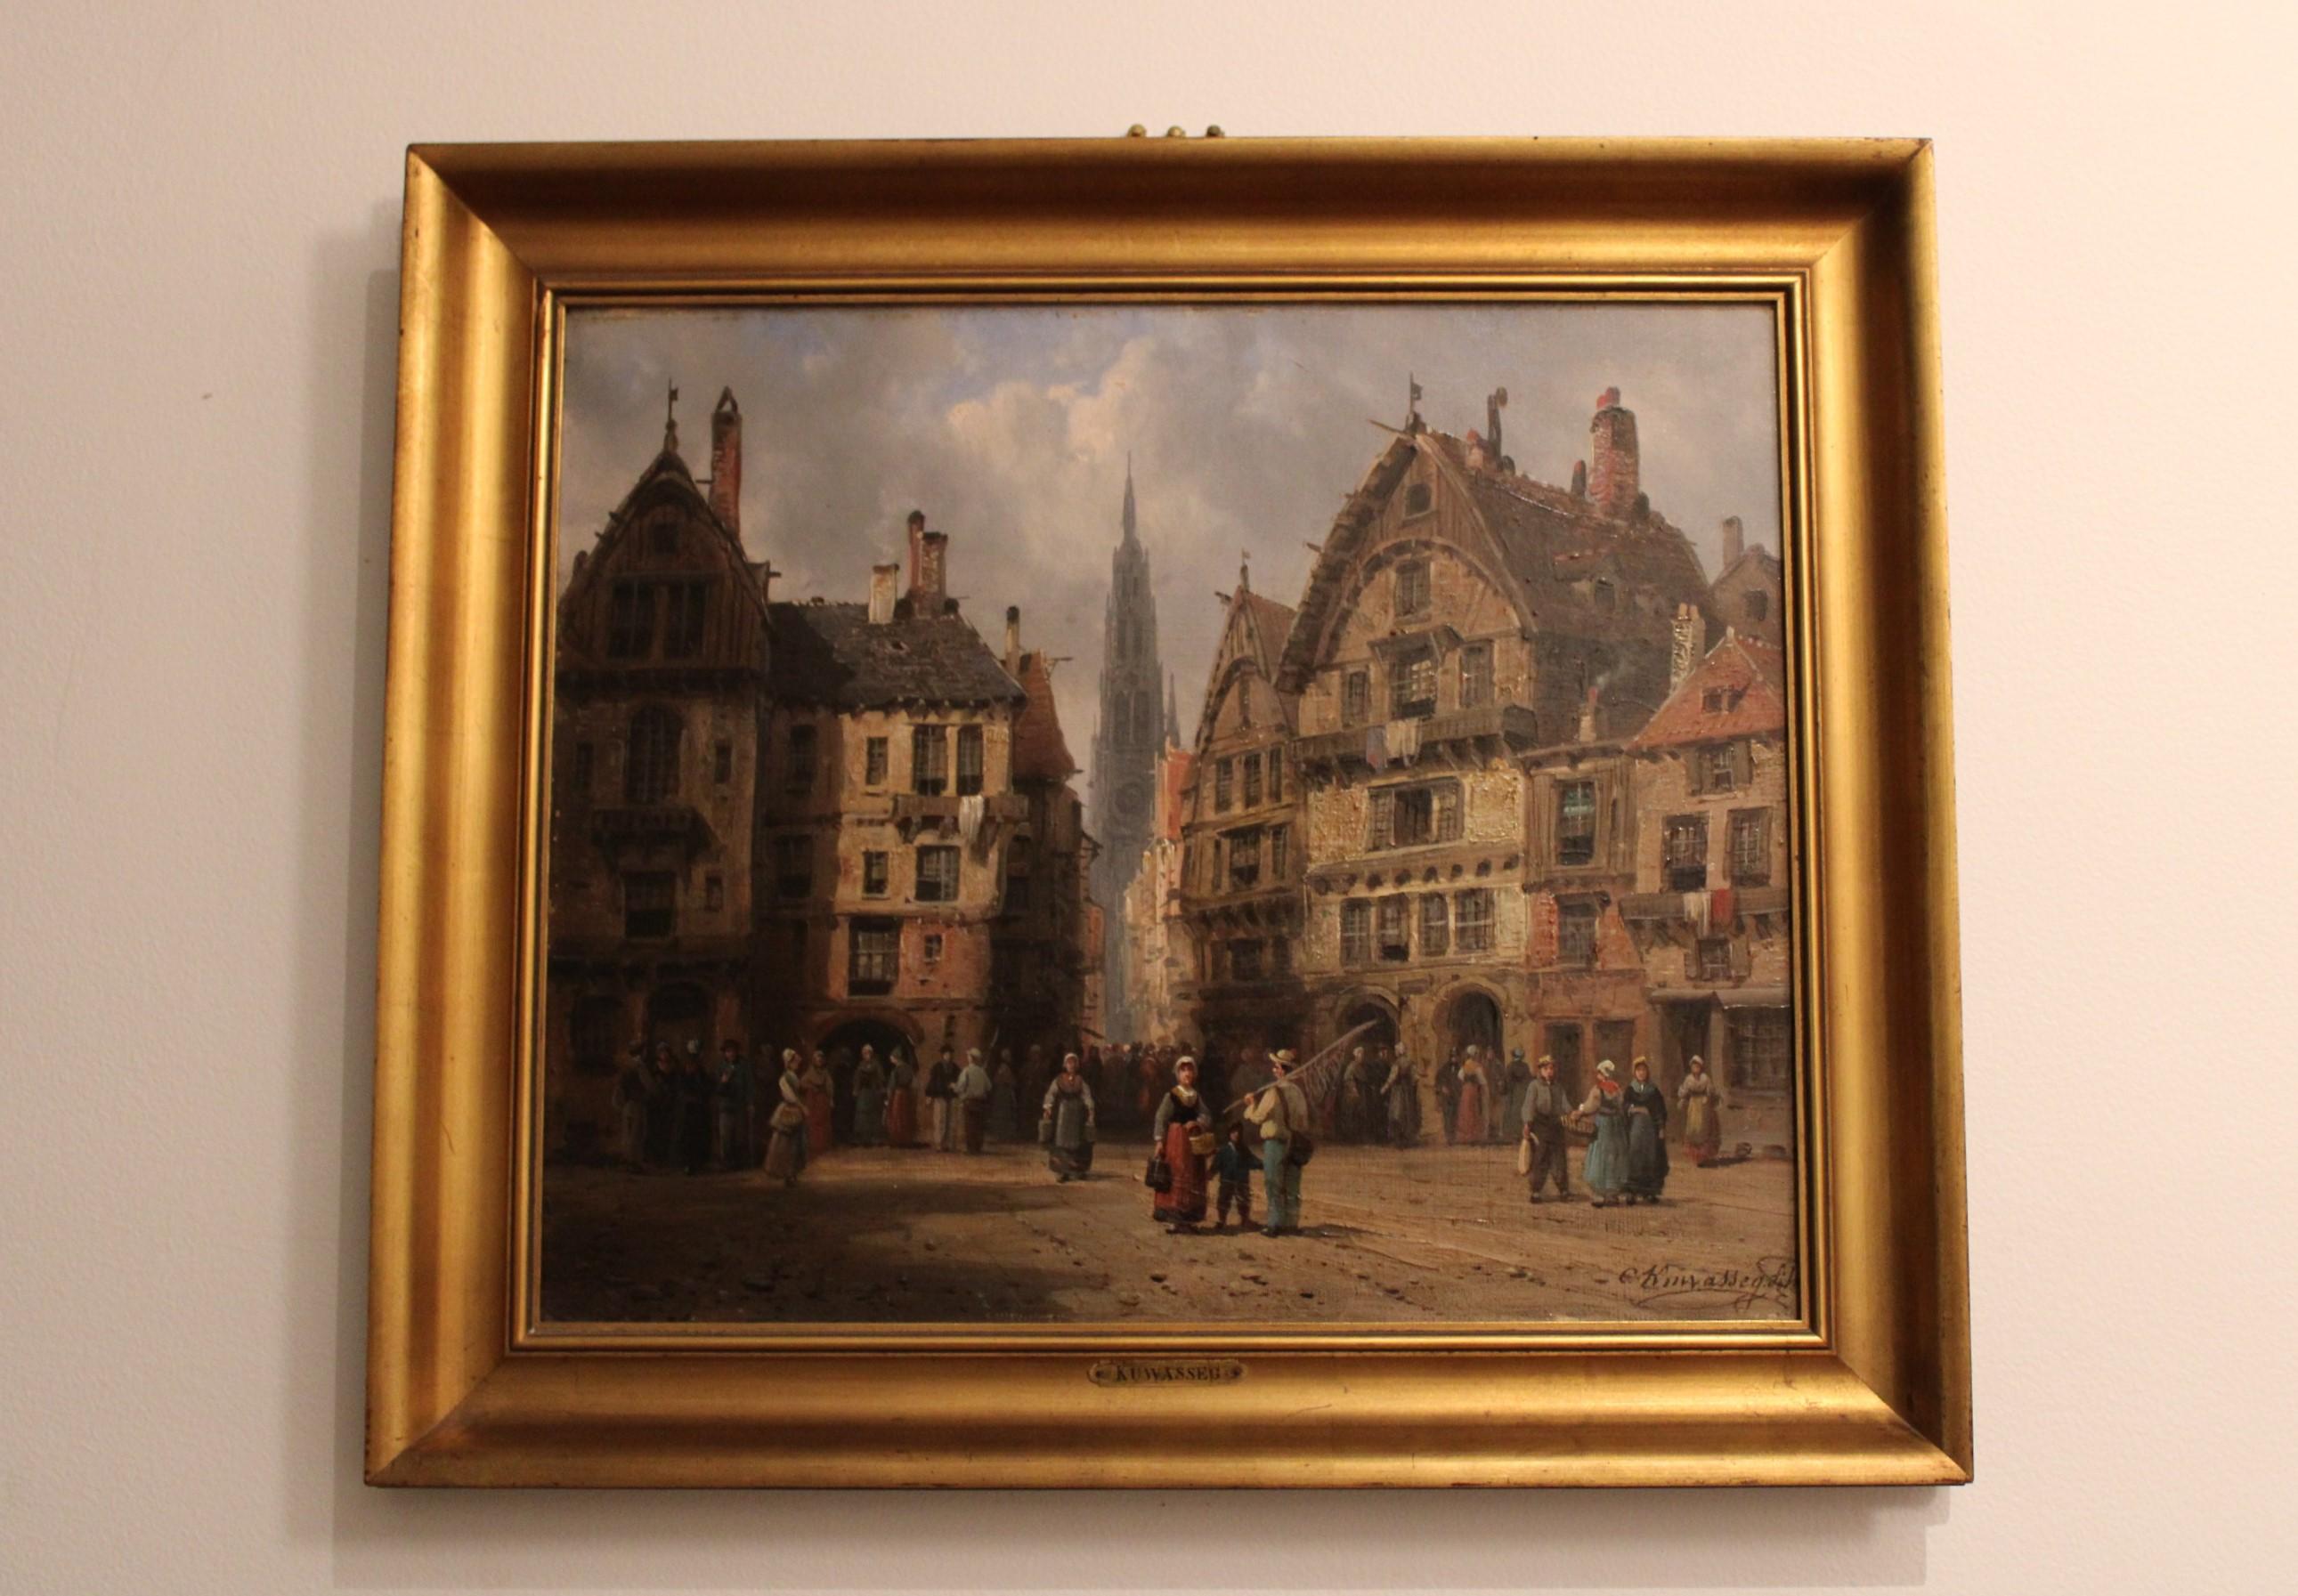 Painting by Charles Euphrasie Kuwasseg (1838-1904) 
Oil on painting, signed lower right
France, 19th century

Frame dimensions : 57 x 49 x 3.5 cm
Painting dimensions : 46 x 38 cm.